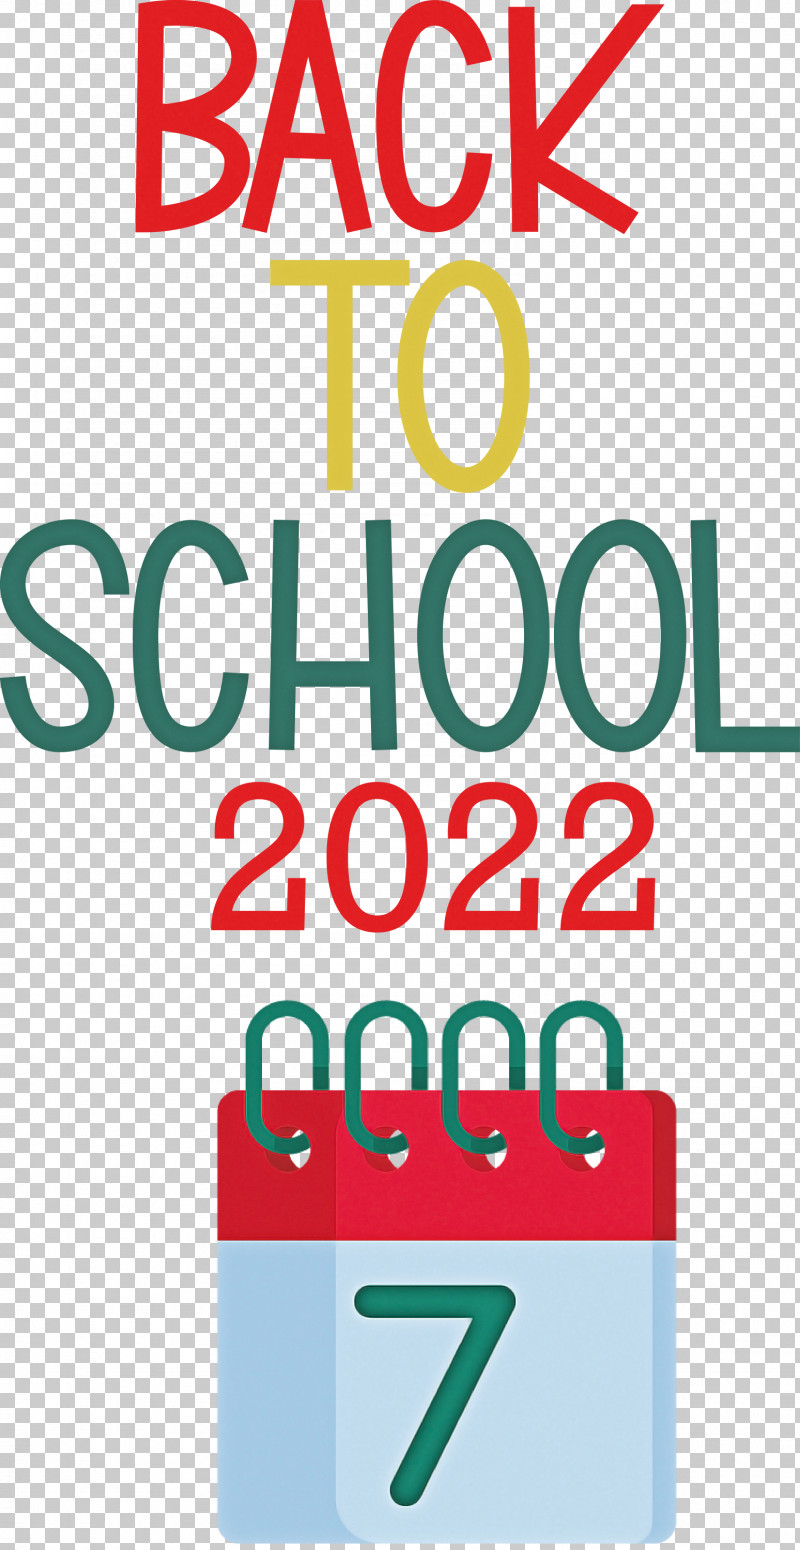 Back To School 2022 PNG, Clipart, Logo, Meter, Number, Sign Free PNG Download